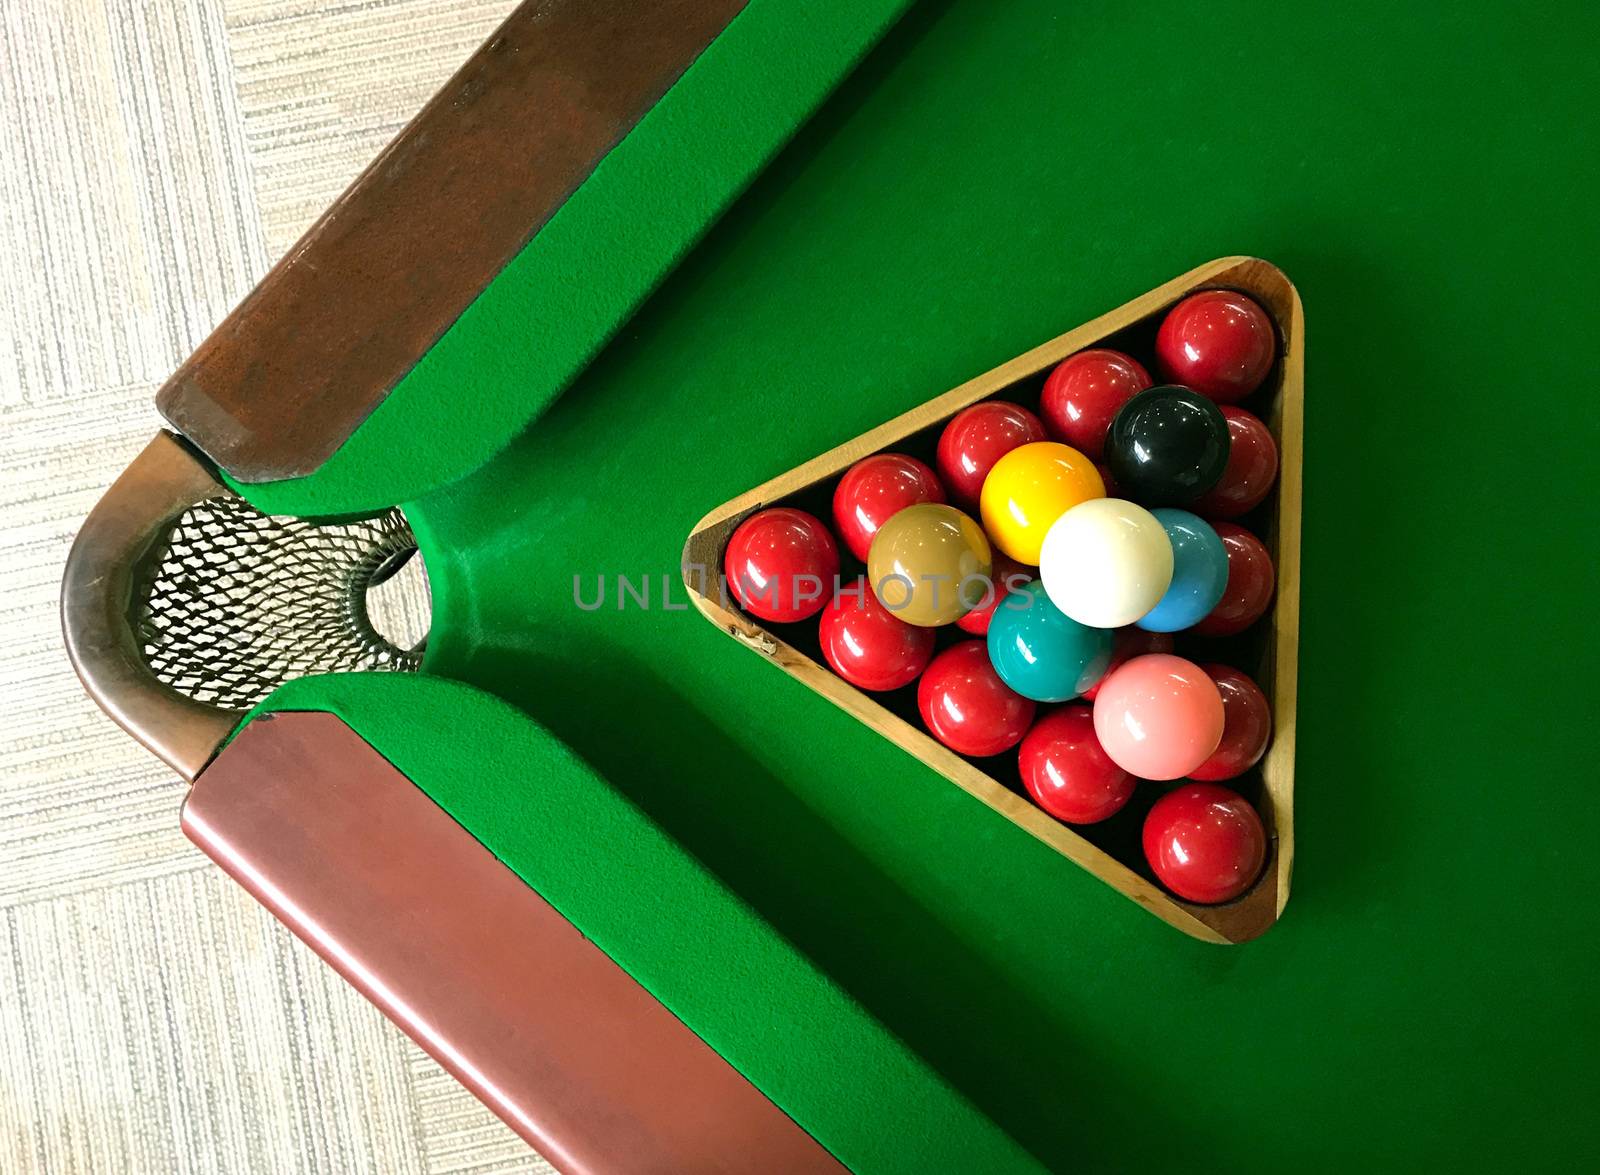 snooker balls on the green game table top view